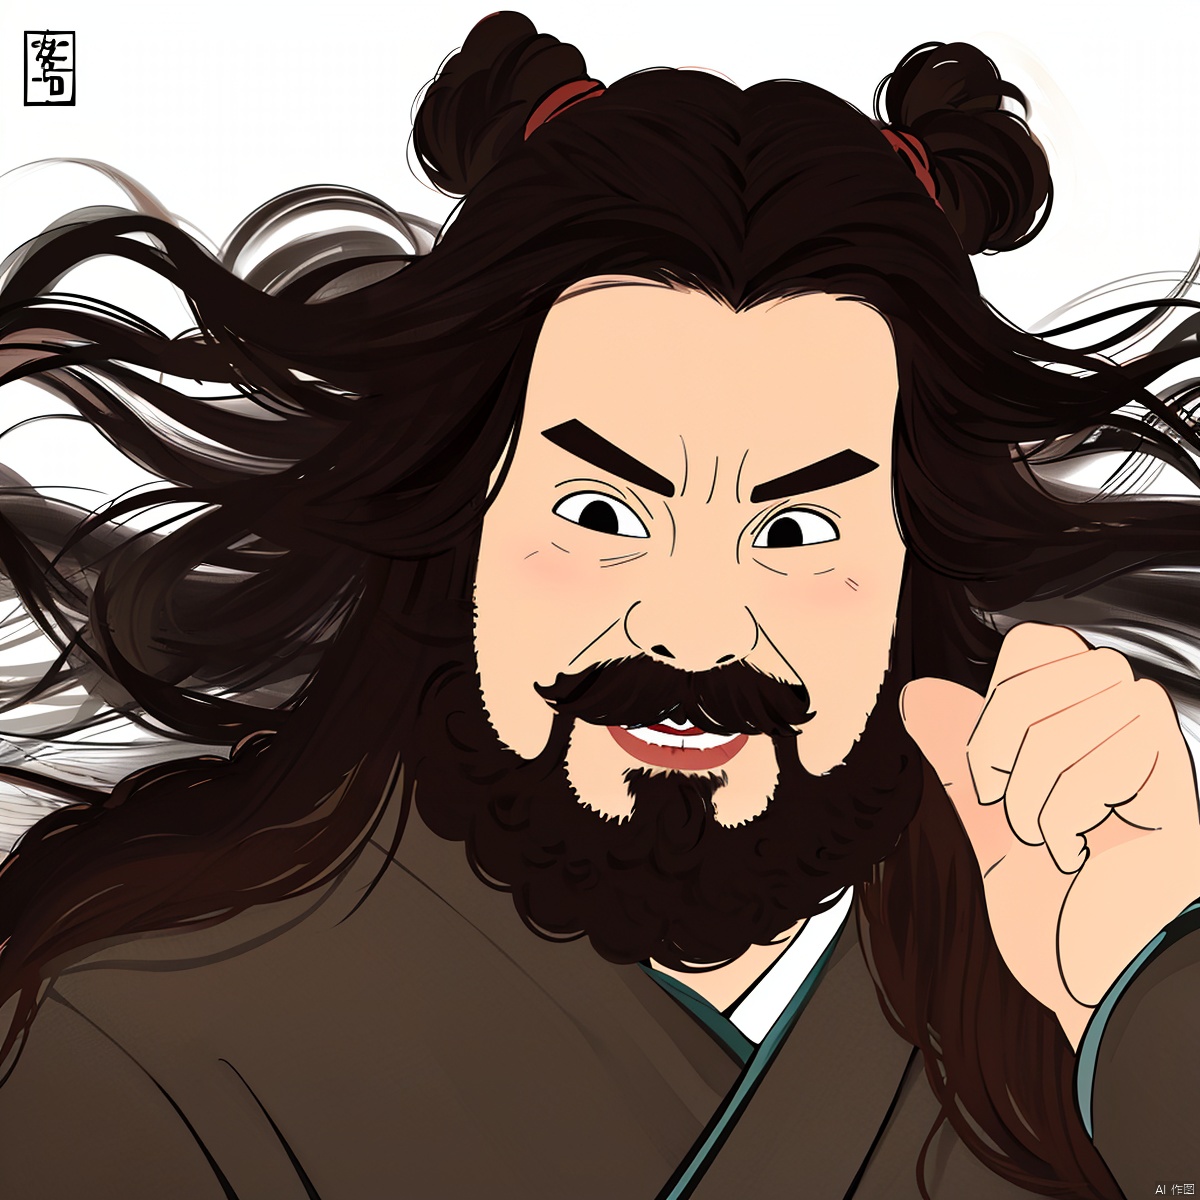 A female man, Ink painting, Hand-drawn illustration, 1 girl, Head image, A girl's avatar, Zhang Fei's image, Female version of Zhang Fei, full of beard, Beard, A woman with a long beard, Pure background, upper body, solo, long hair, simple background, black hair, white background, black eyes, facial hair, beard, mustache